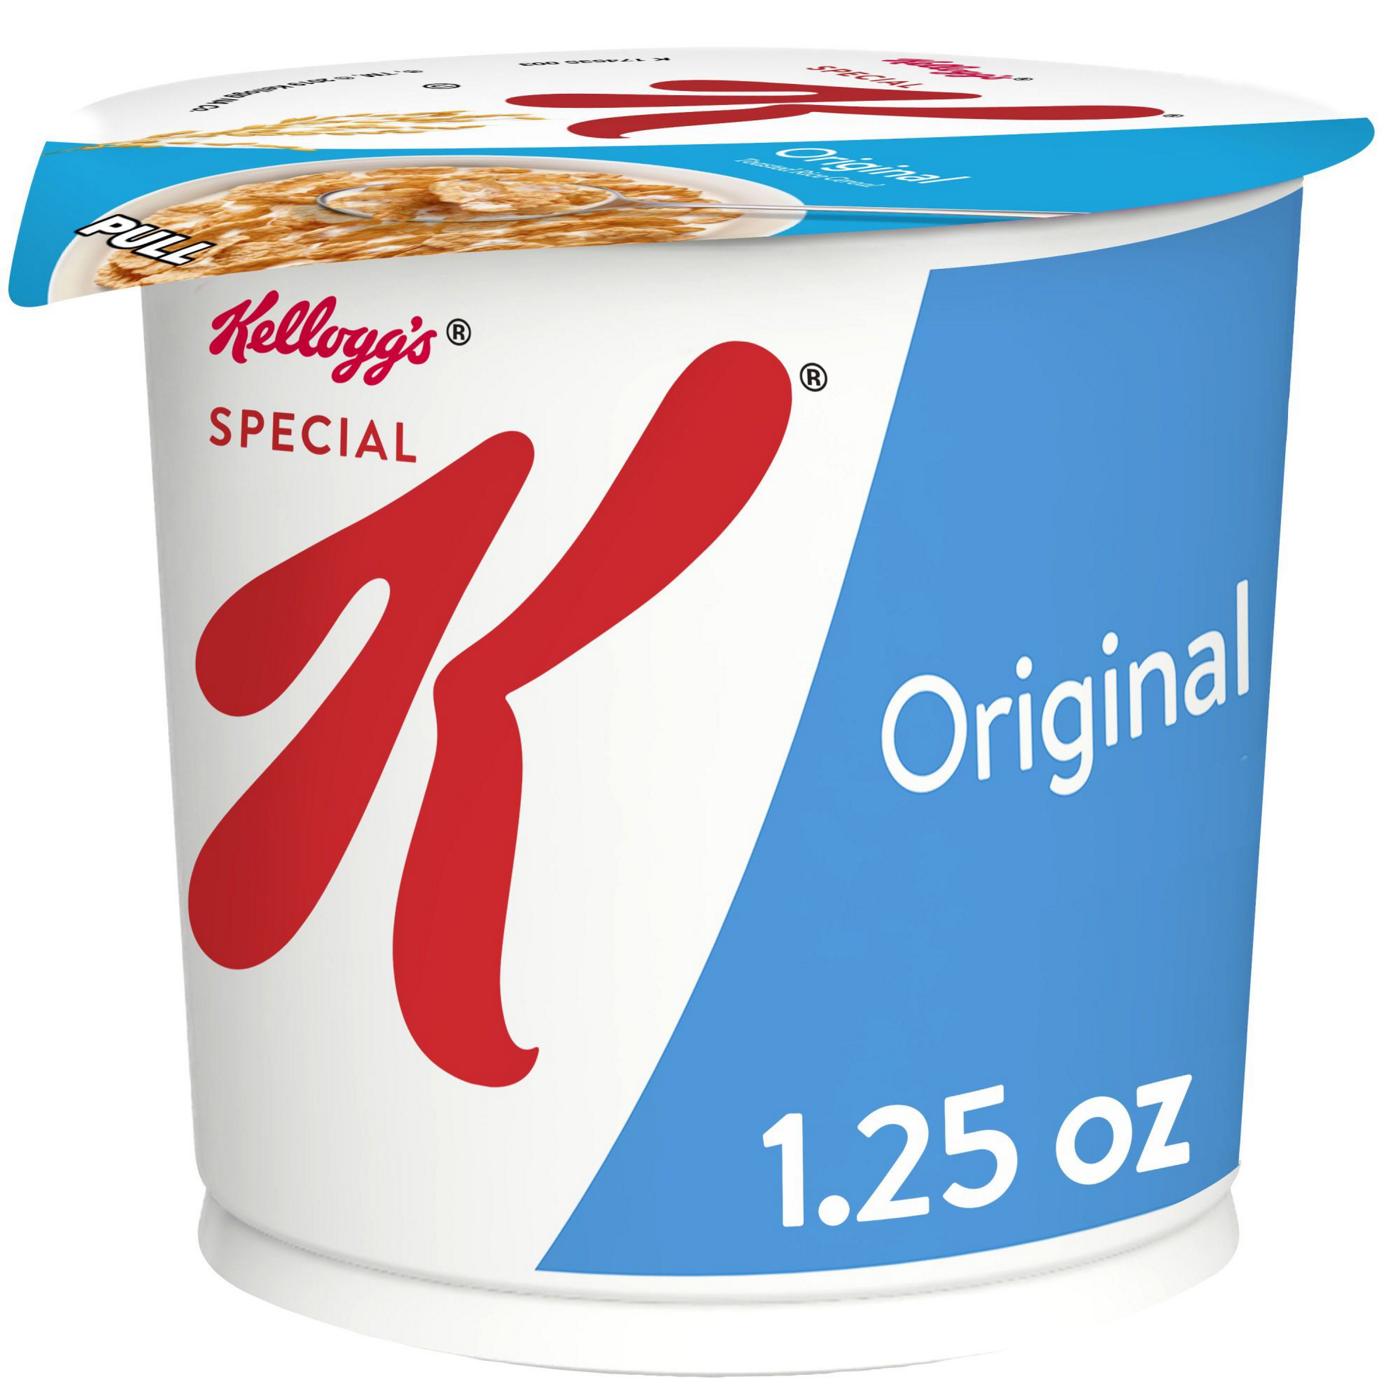 Kellogg's Special K Original Cereal Cup; image 1 of 5